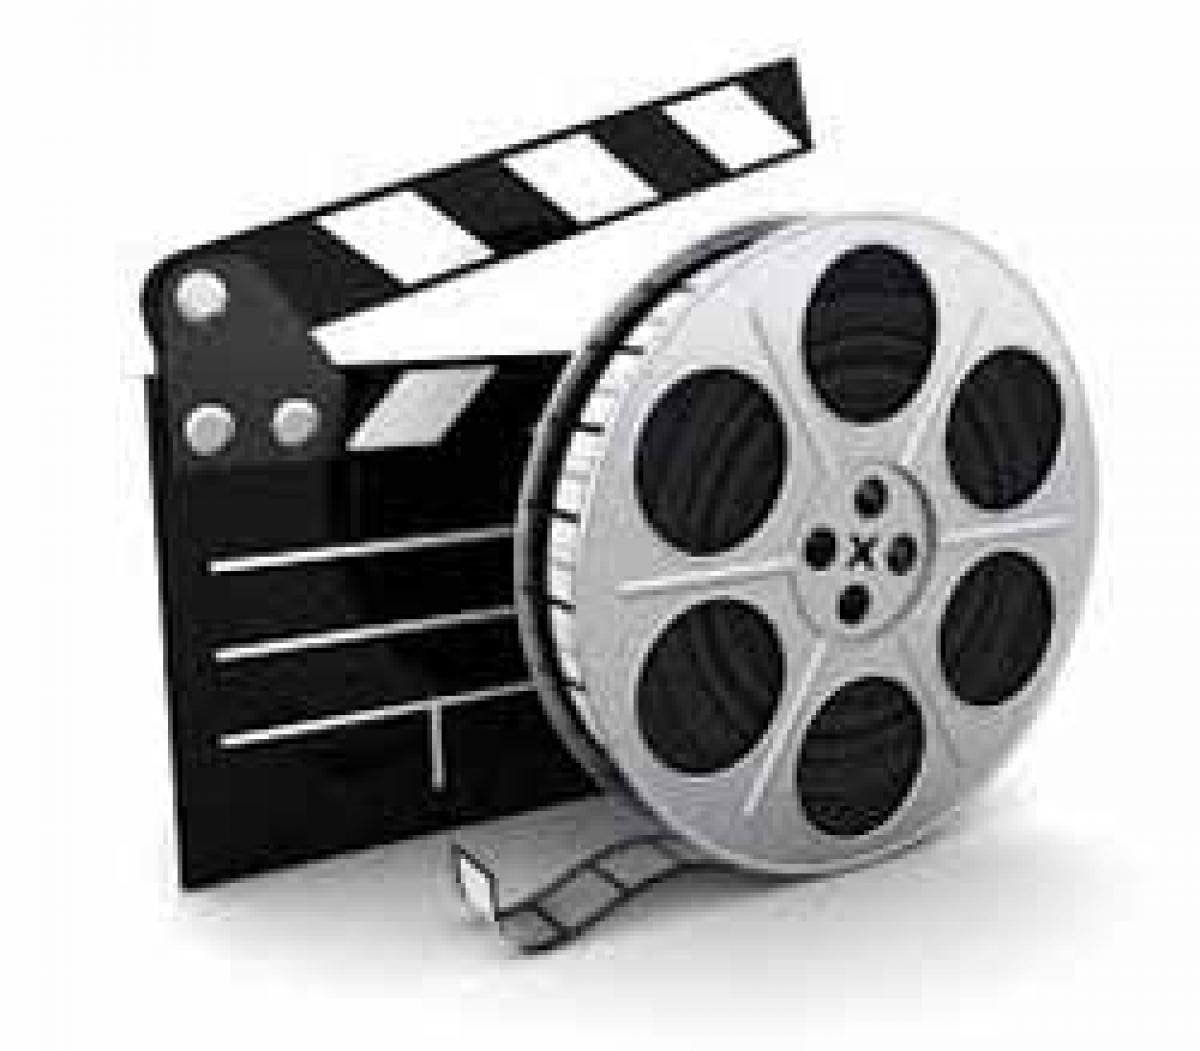 Tiff between producers, audio firms